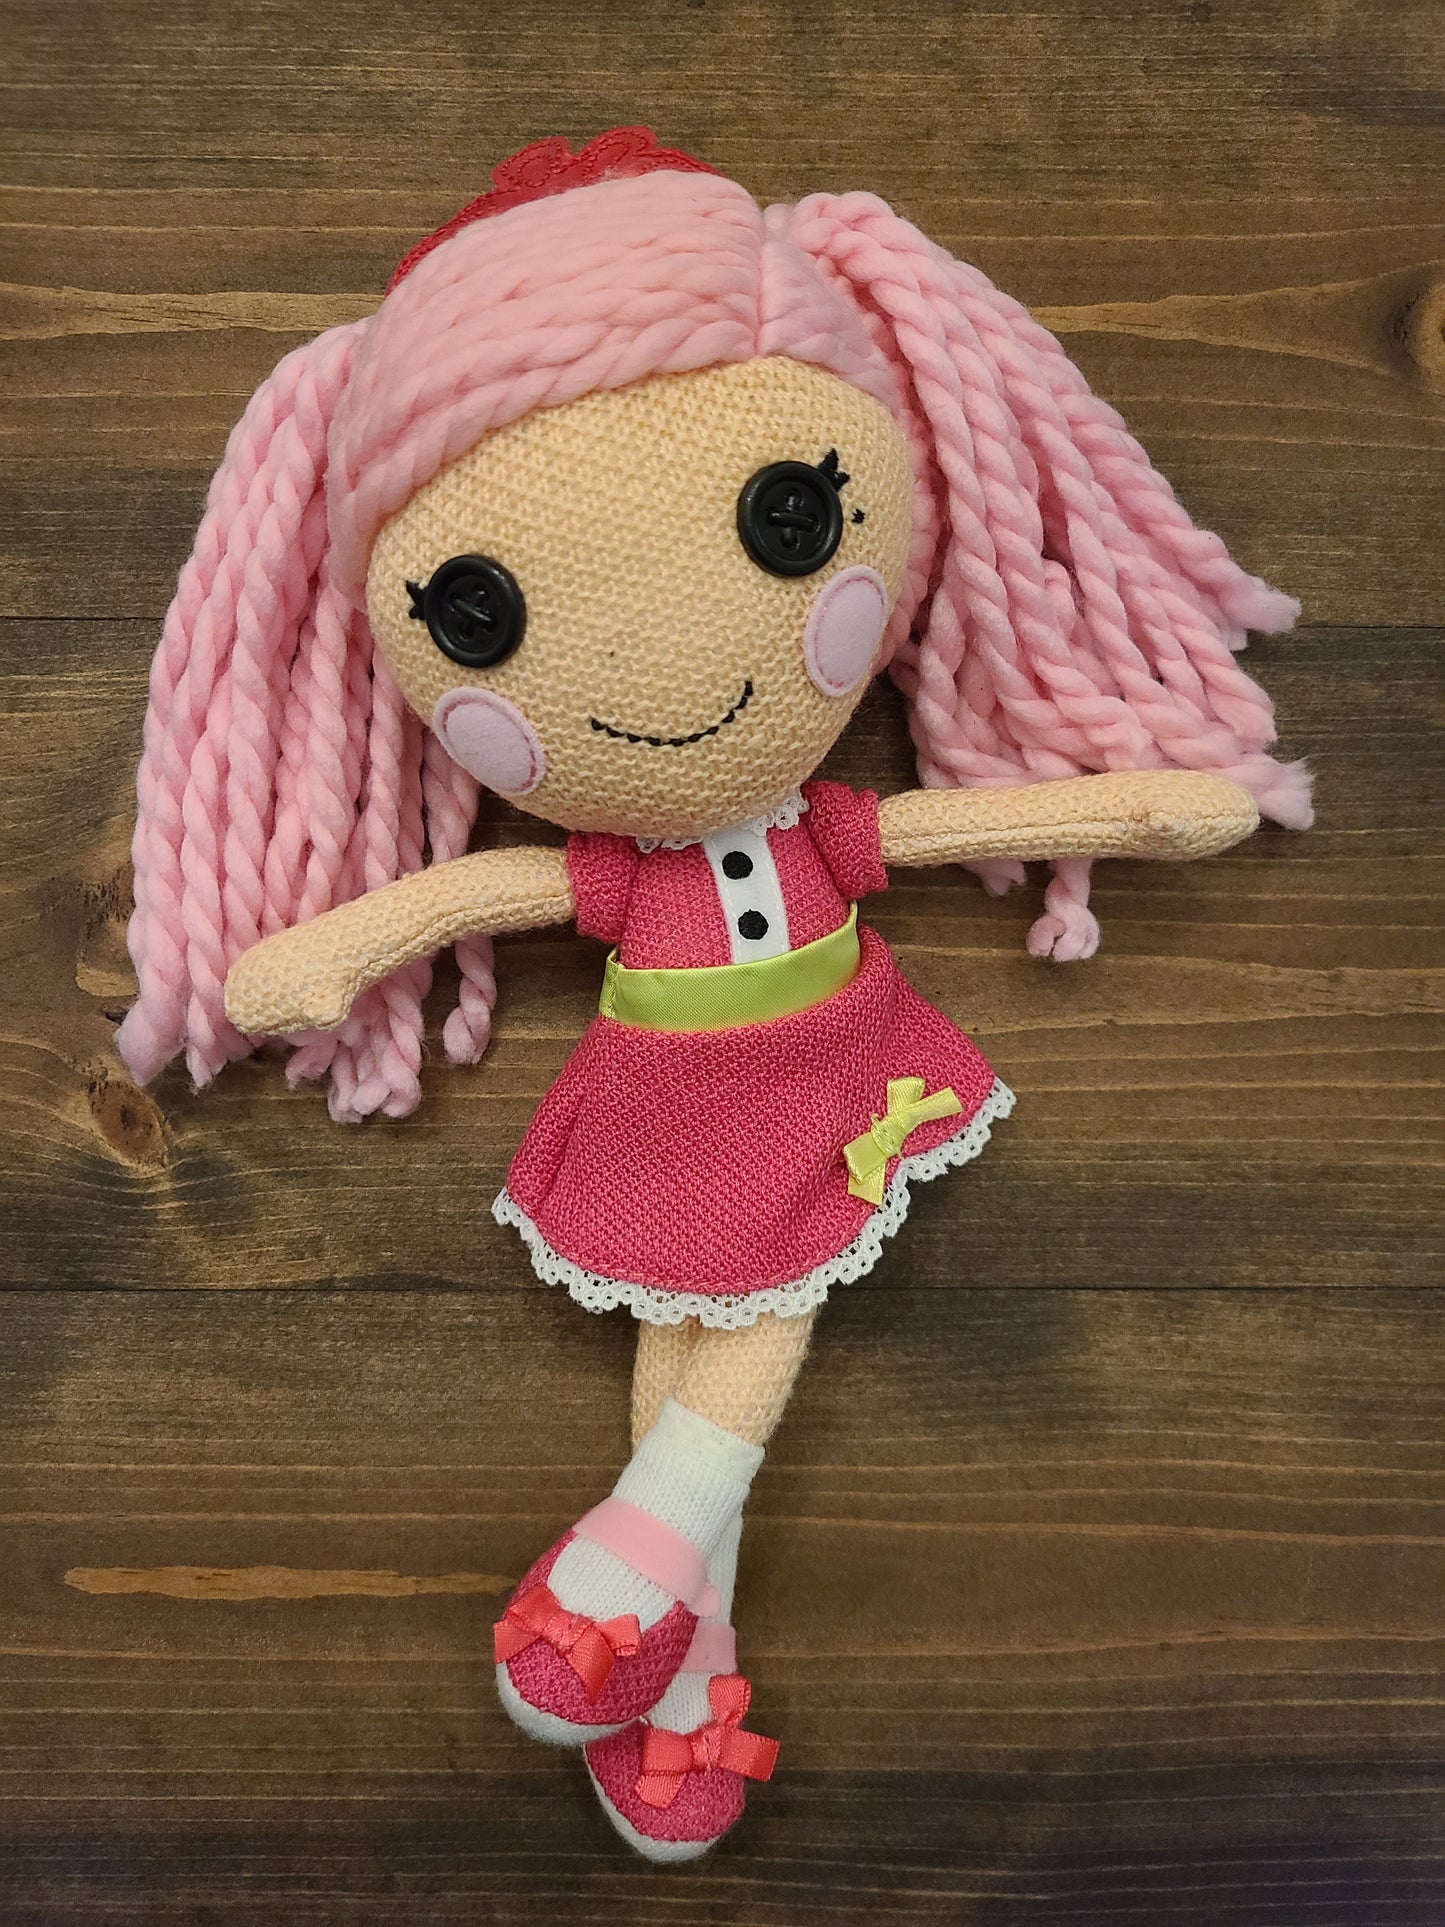 Soft Rag 11in Girls Playhouse Collectable Button Eyes Lalaloopsy Soft Yarn Magic Hair Soft Plush Rag Doll Toy/ MGA/ Collectable Gift